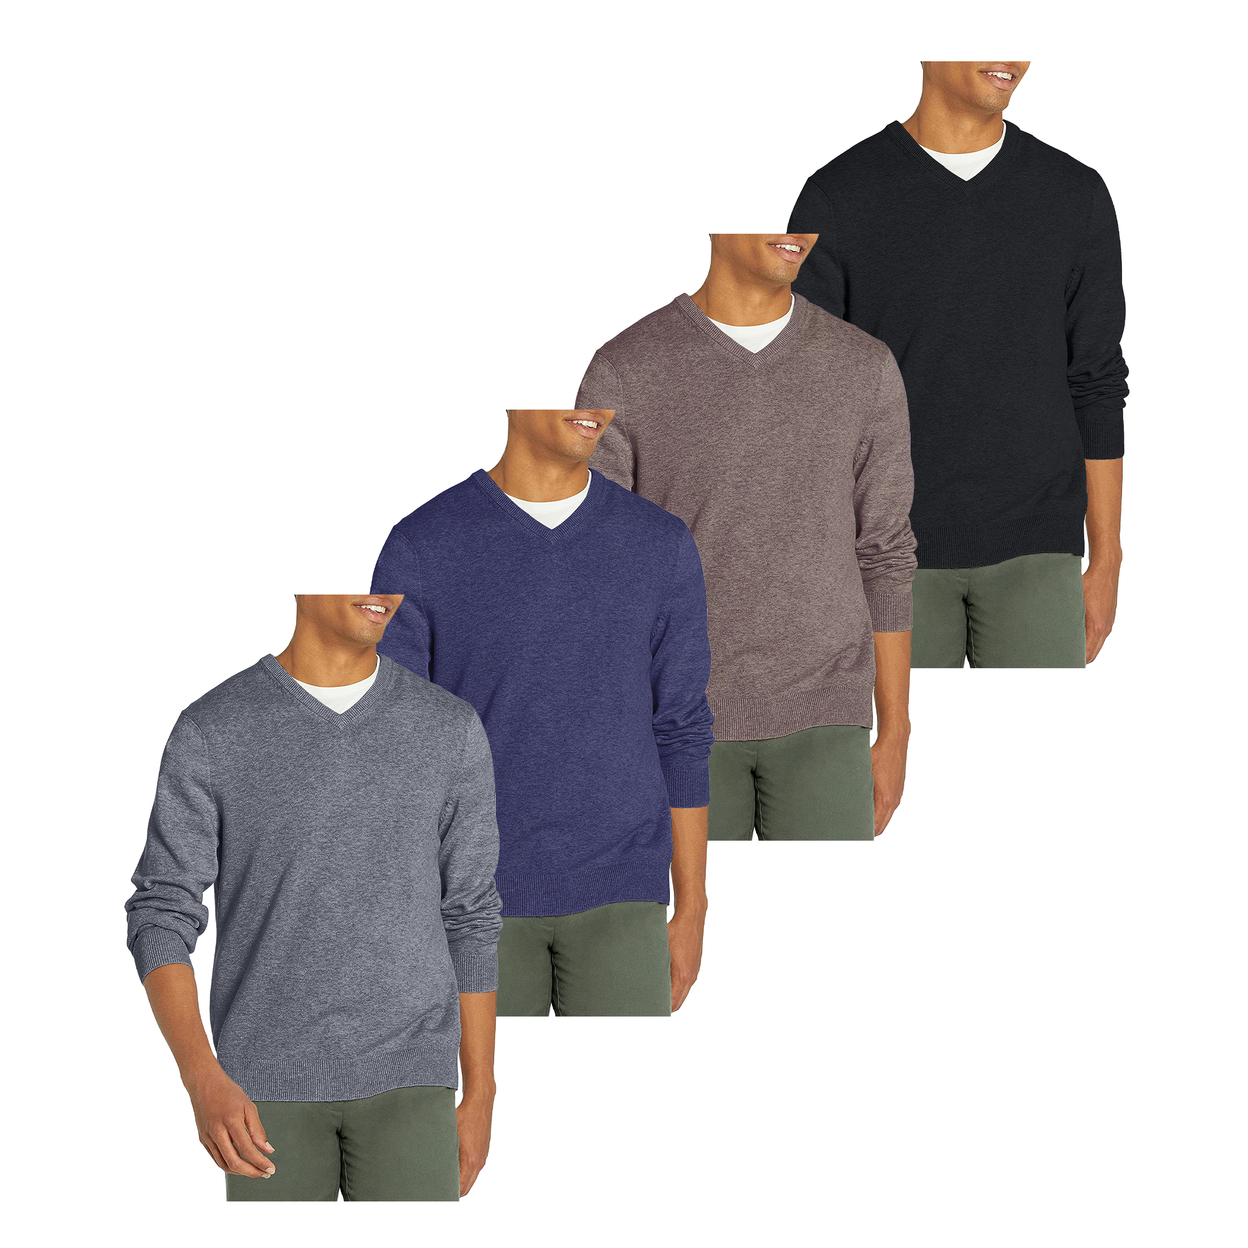 2-Pack: Men's Casual Ultra Soft Slim Fit Warm Knit V-Neck Sweater - Black & Brown, Small